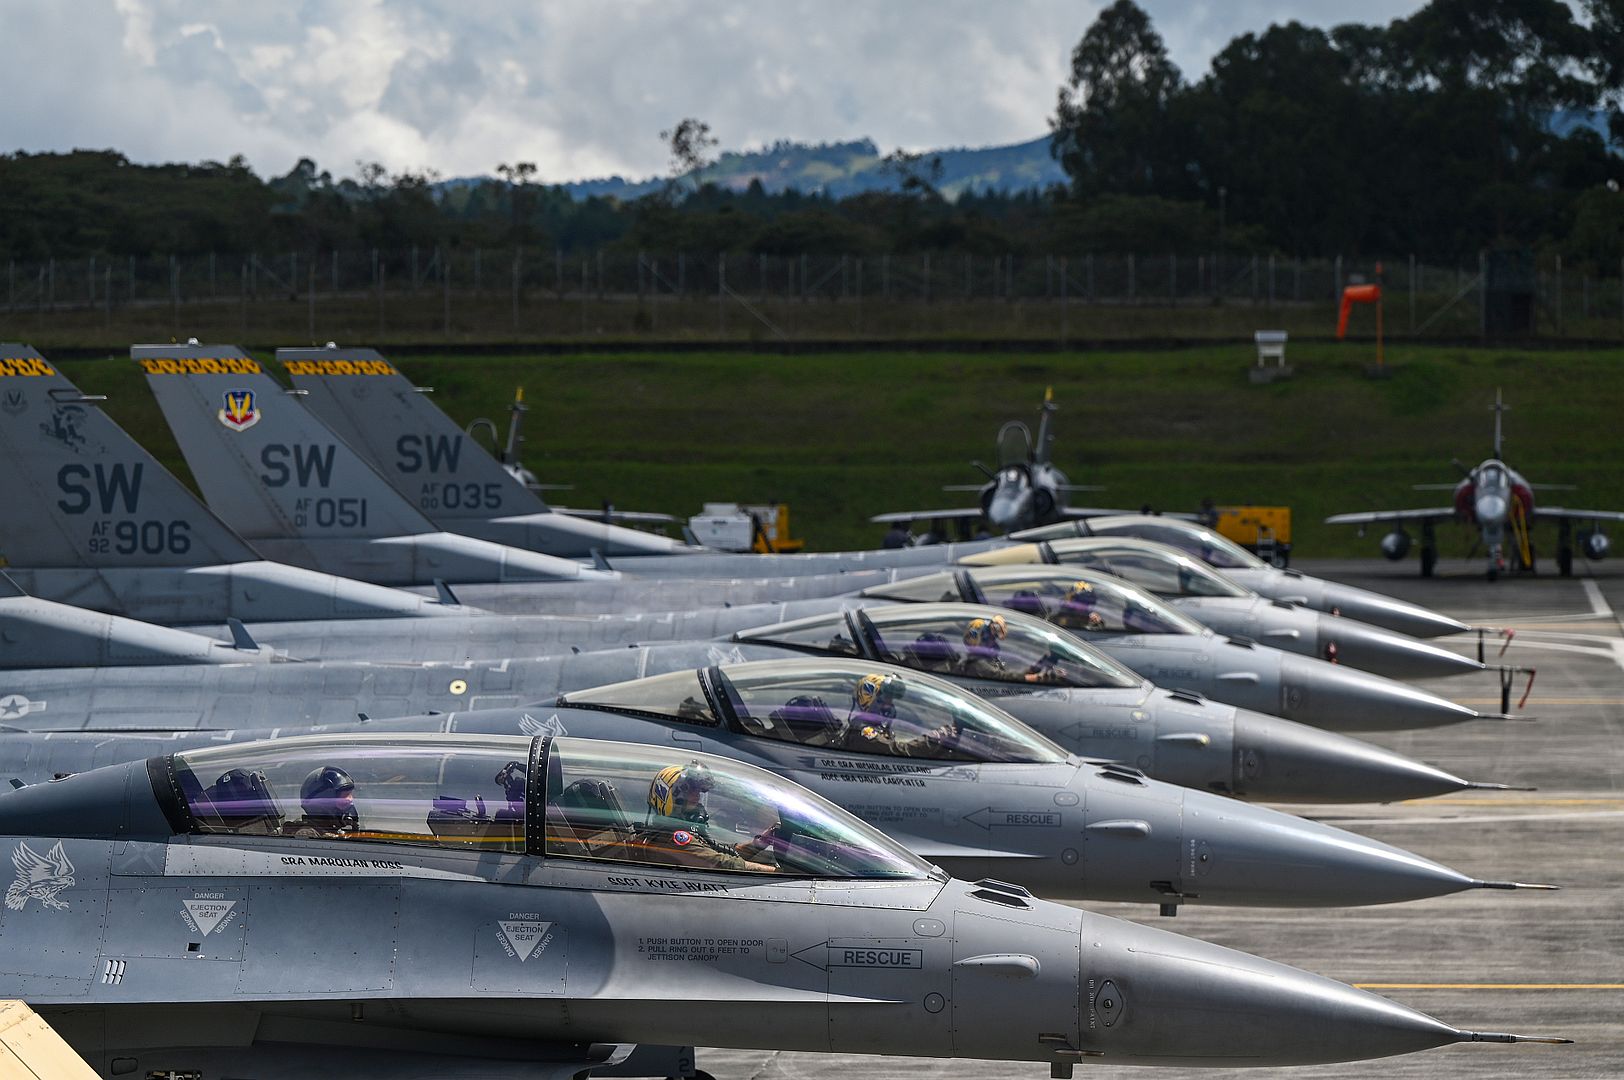 16 Fighting Falcon Pilots Assigned To The 79th Expeditionary Fighter Squadron Prepare To Take Off From Comando Aereo De Combate Number 5